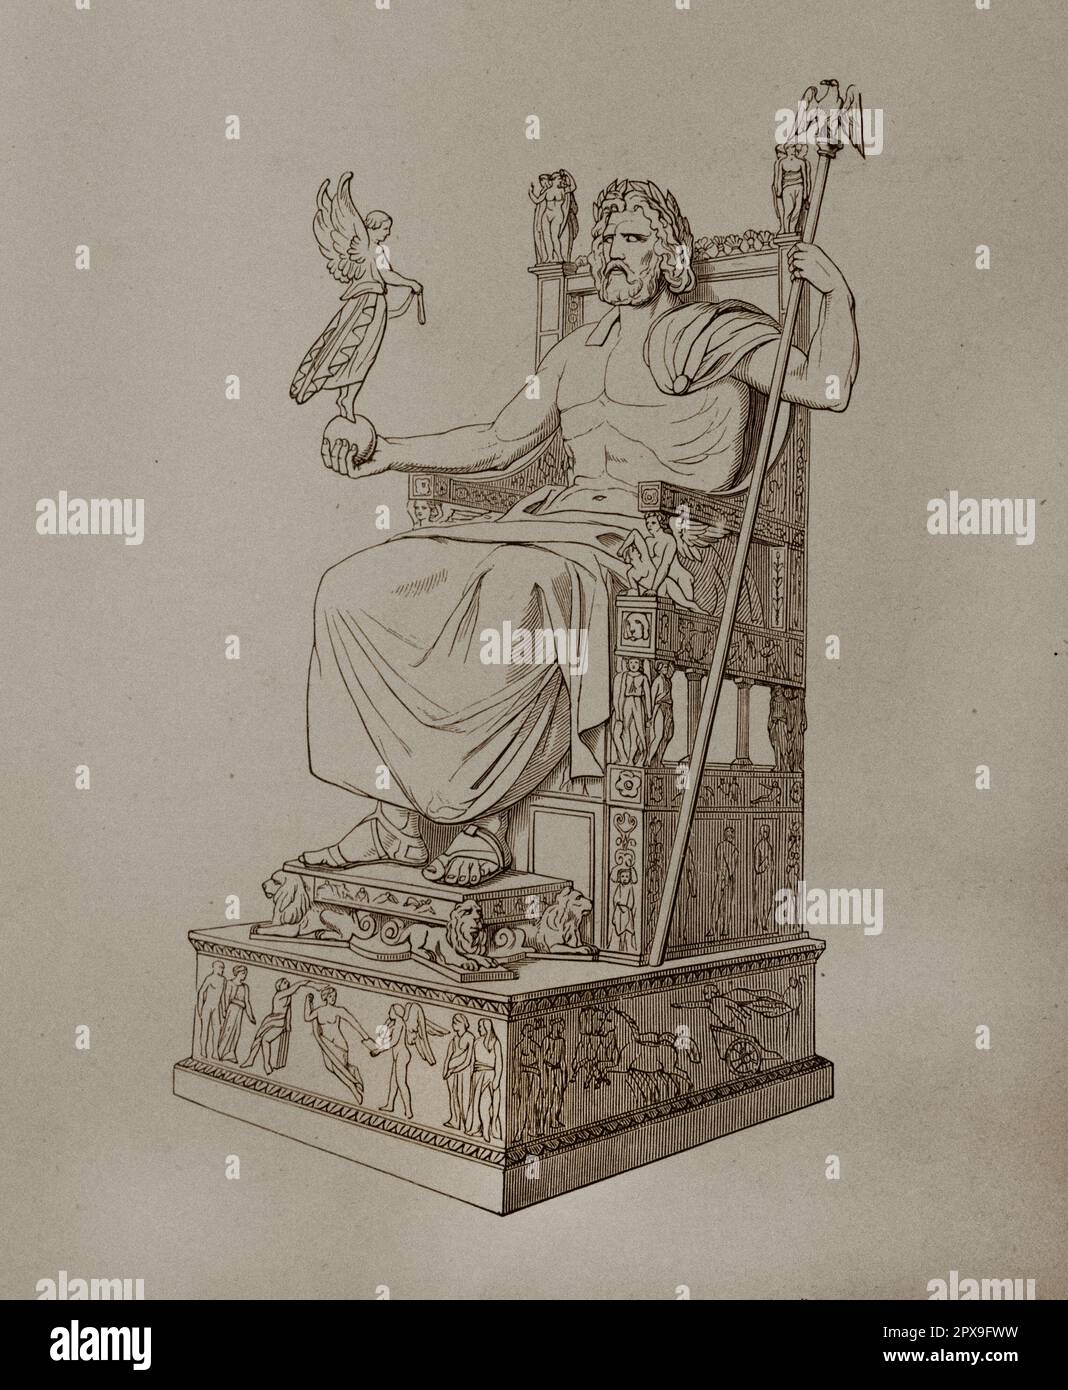 Vintage illustration of statue of Zeus at Olympia. The Statue of Zeus at Olympia was a giant seated figure, about 12.4 m (41 ft) tall, made by the Greek sculptor Phidias around 435 BC at the sanctuary of Olympia, Greece, and erected in the Temple of Zeus there. Zeus is the sky and thunder god in ancient Greek religion, who rules as king of the gods of Mount Olympus. The statue was a chryselephantine sculpture of ivory plates and gold panels on a wooden framework. Zeus sat on a painted cedarwood throne ornamented with ebony, ivory, gold, and precious stones. It was one of the Seven Wonders of t Stock Photo